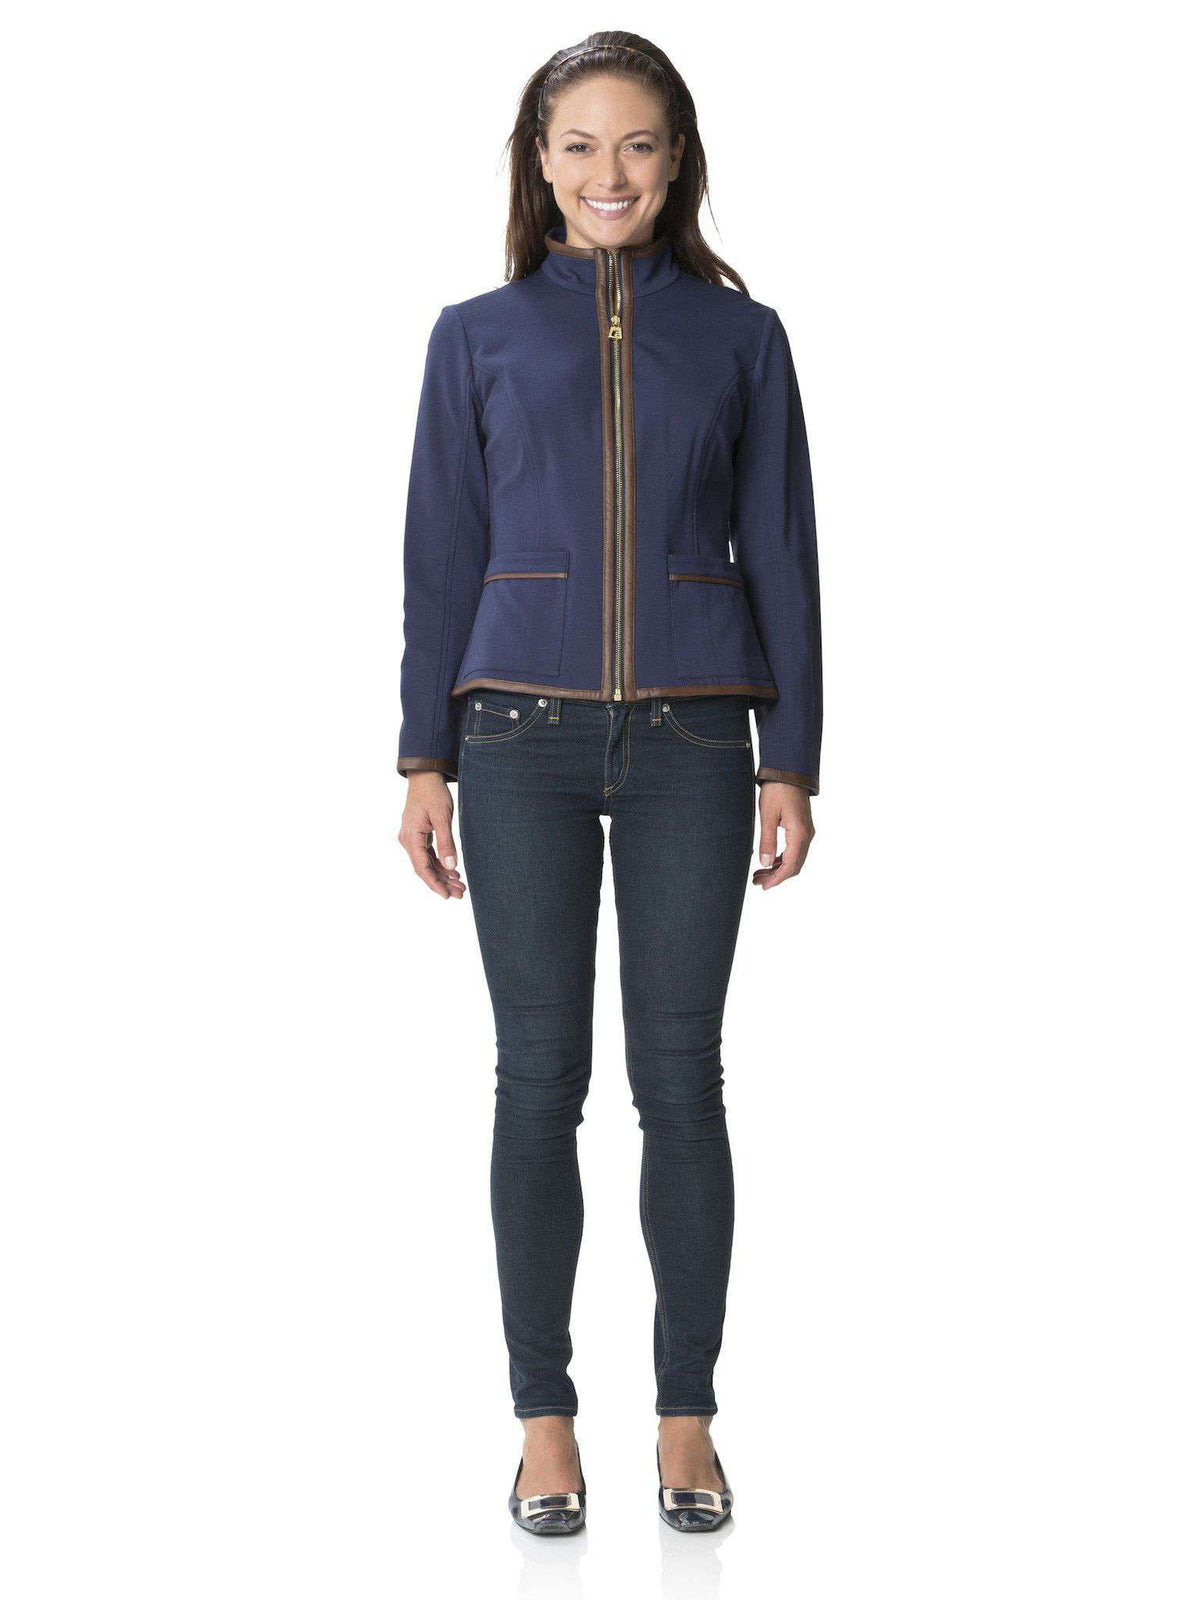 Must be Manhattan Jacket in Navy by Sail to Sable - Country Club Prep